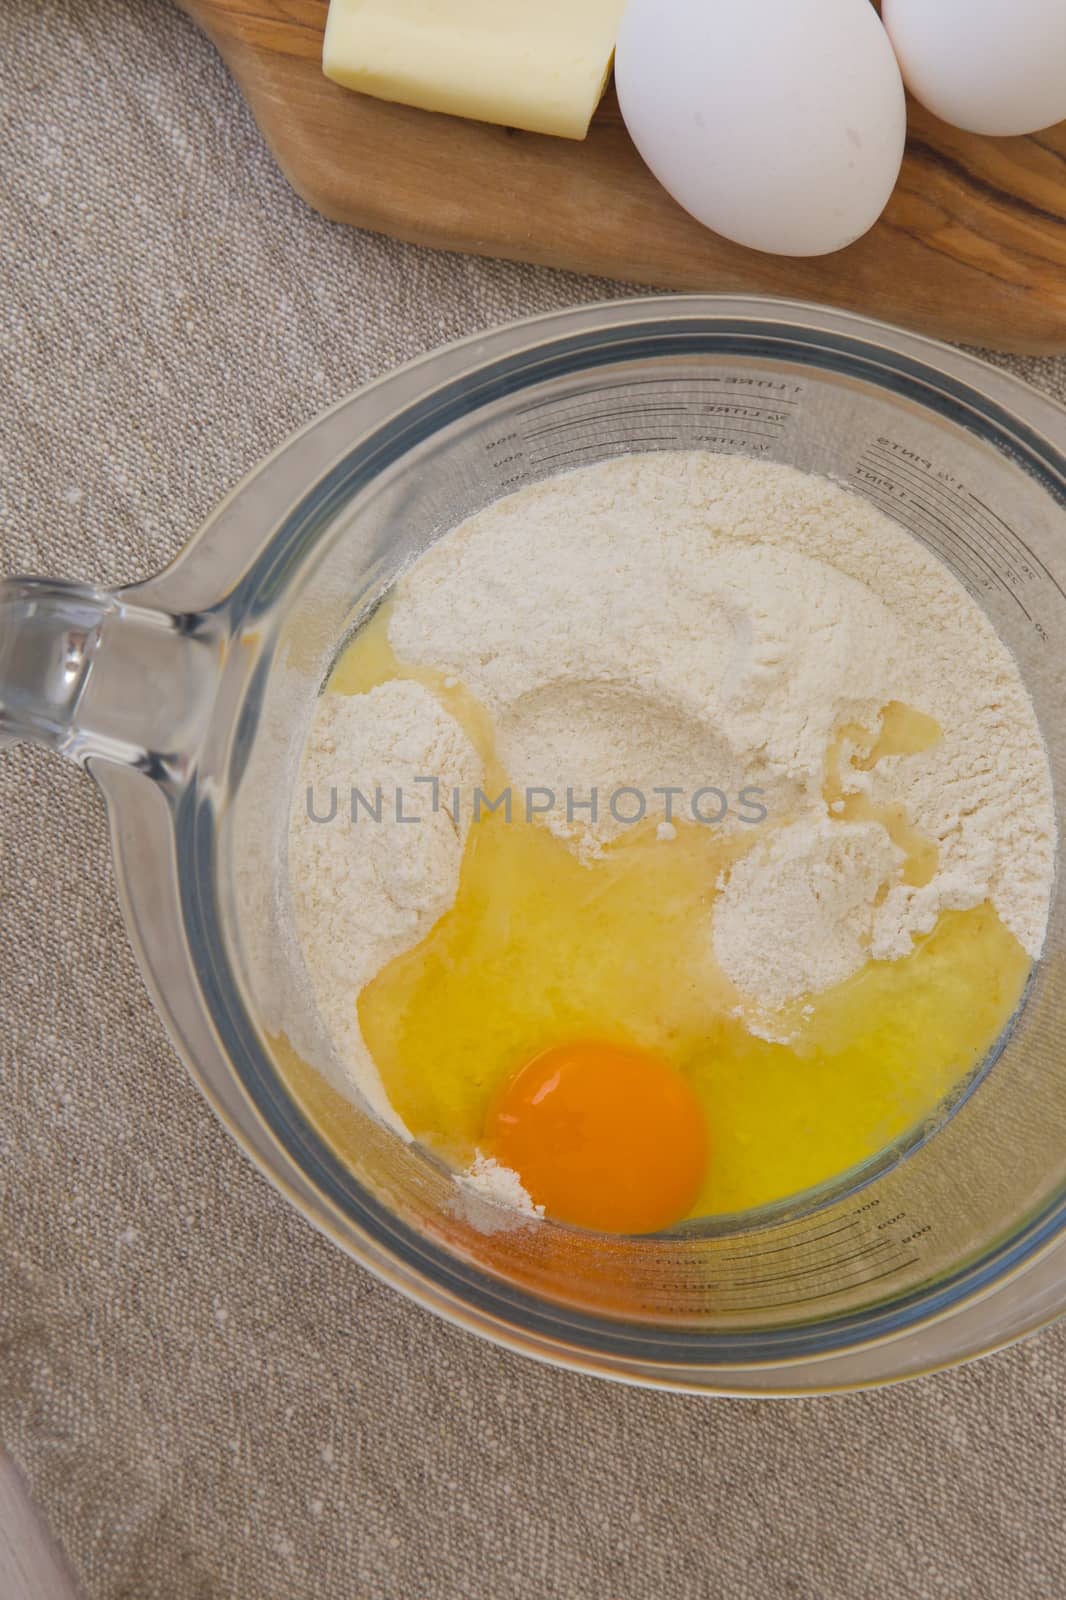 Ingredients for preparing biscuits in the glass measuring cup by tolikoff_photography